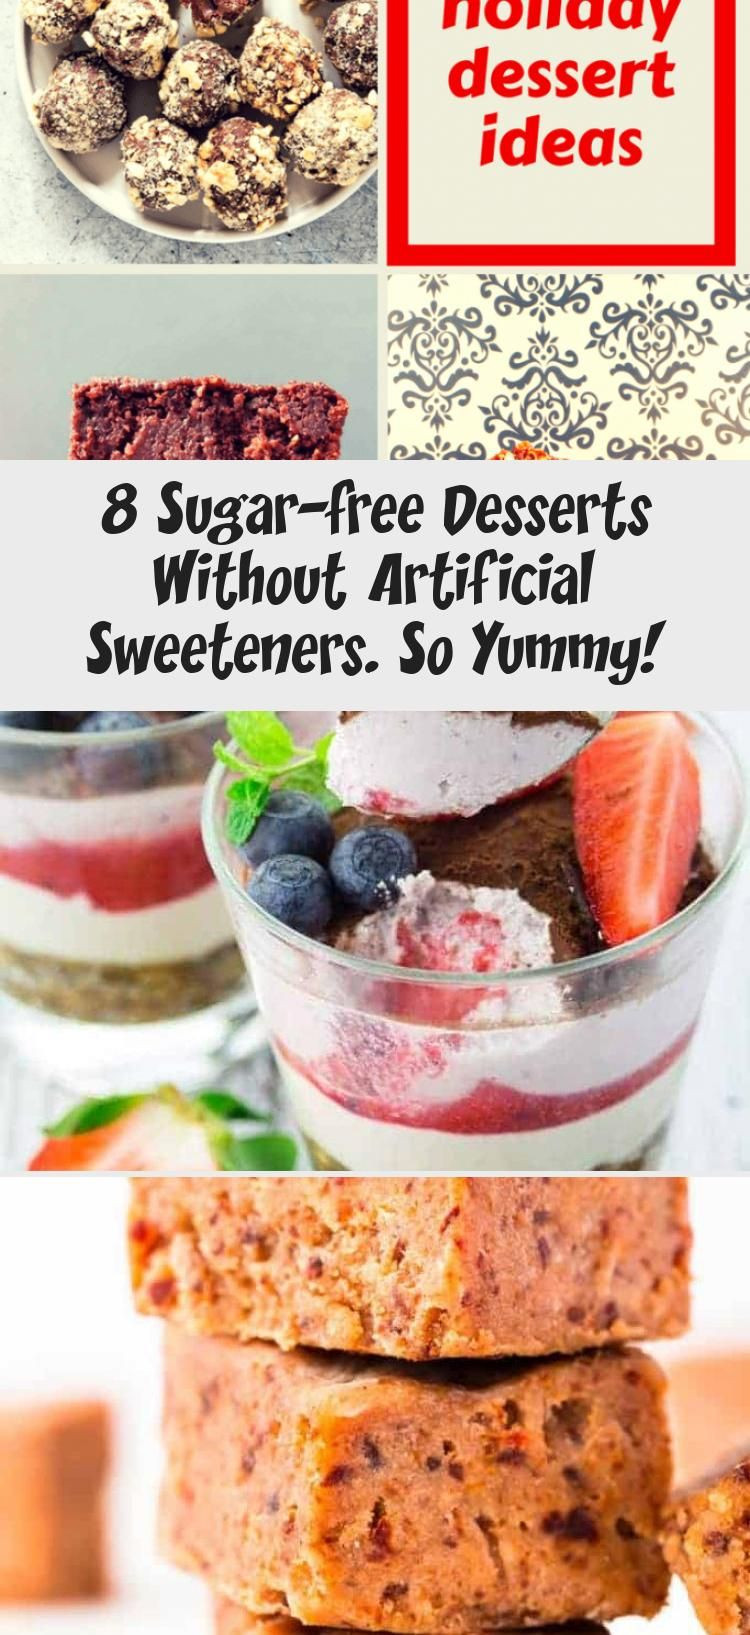 Sugar Free Desserts Without Artificial Sweeteners
 These sugar free desserts are perfect for diabetics or